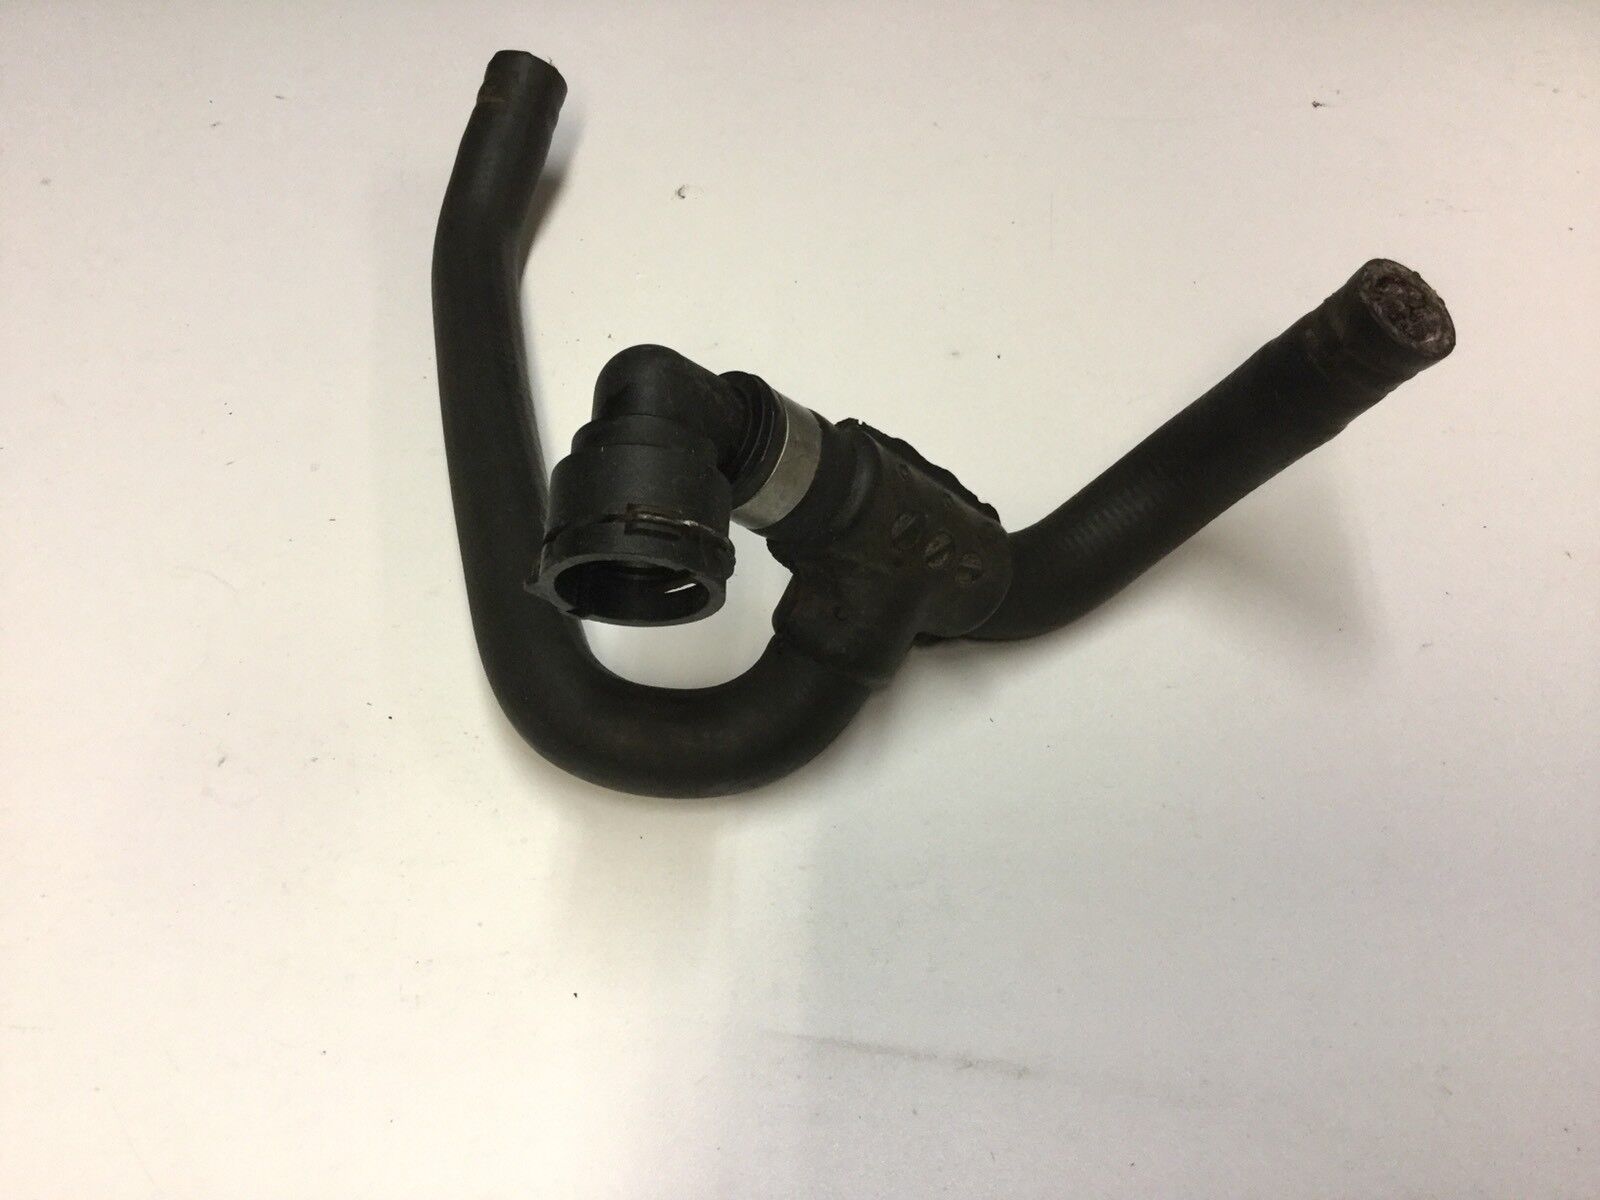 Jaguar S Type 2.5L and 3.0L Petrol Header Tank lower pipe 02-08 Excel Cond.£15